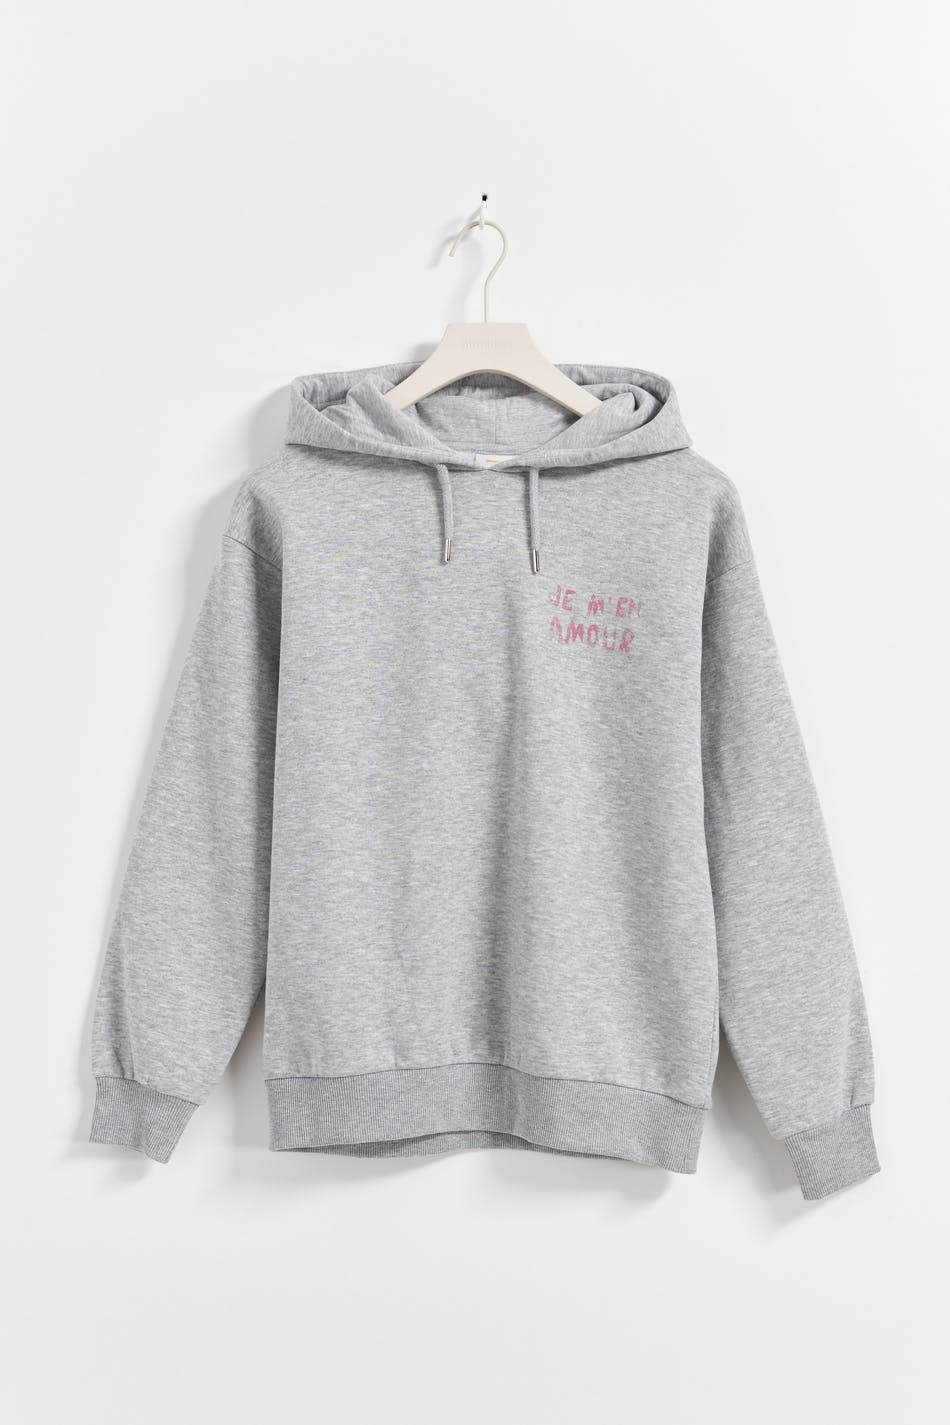 Gina Tricot - Y basic hood - young-tops - Grey - 134/140 - Female